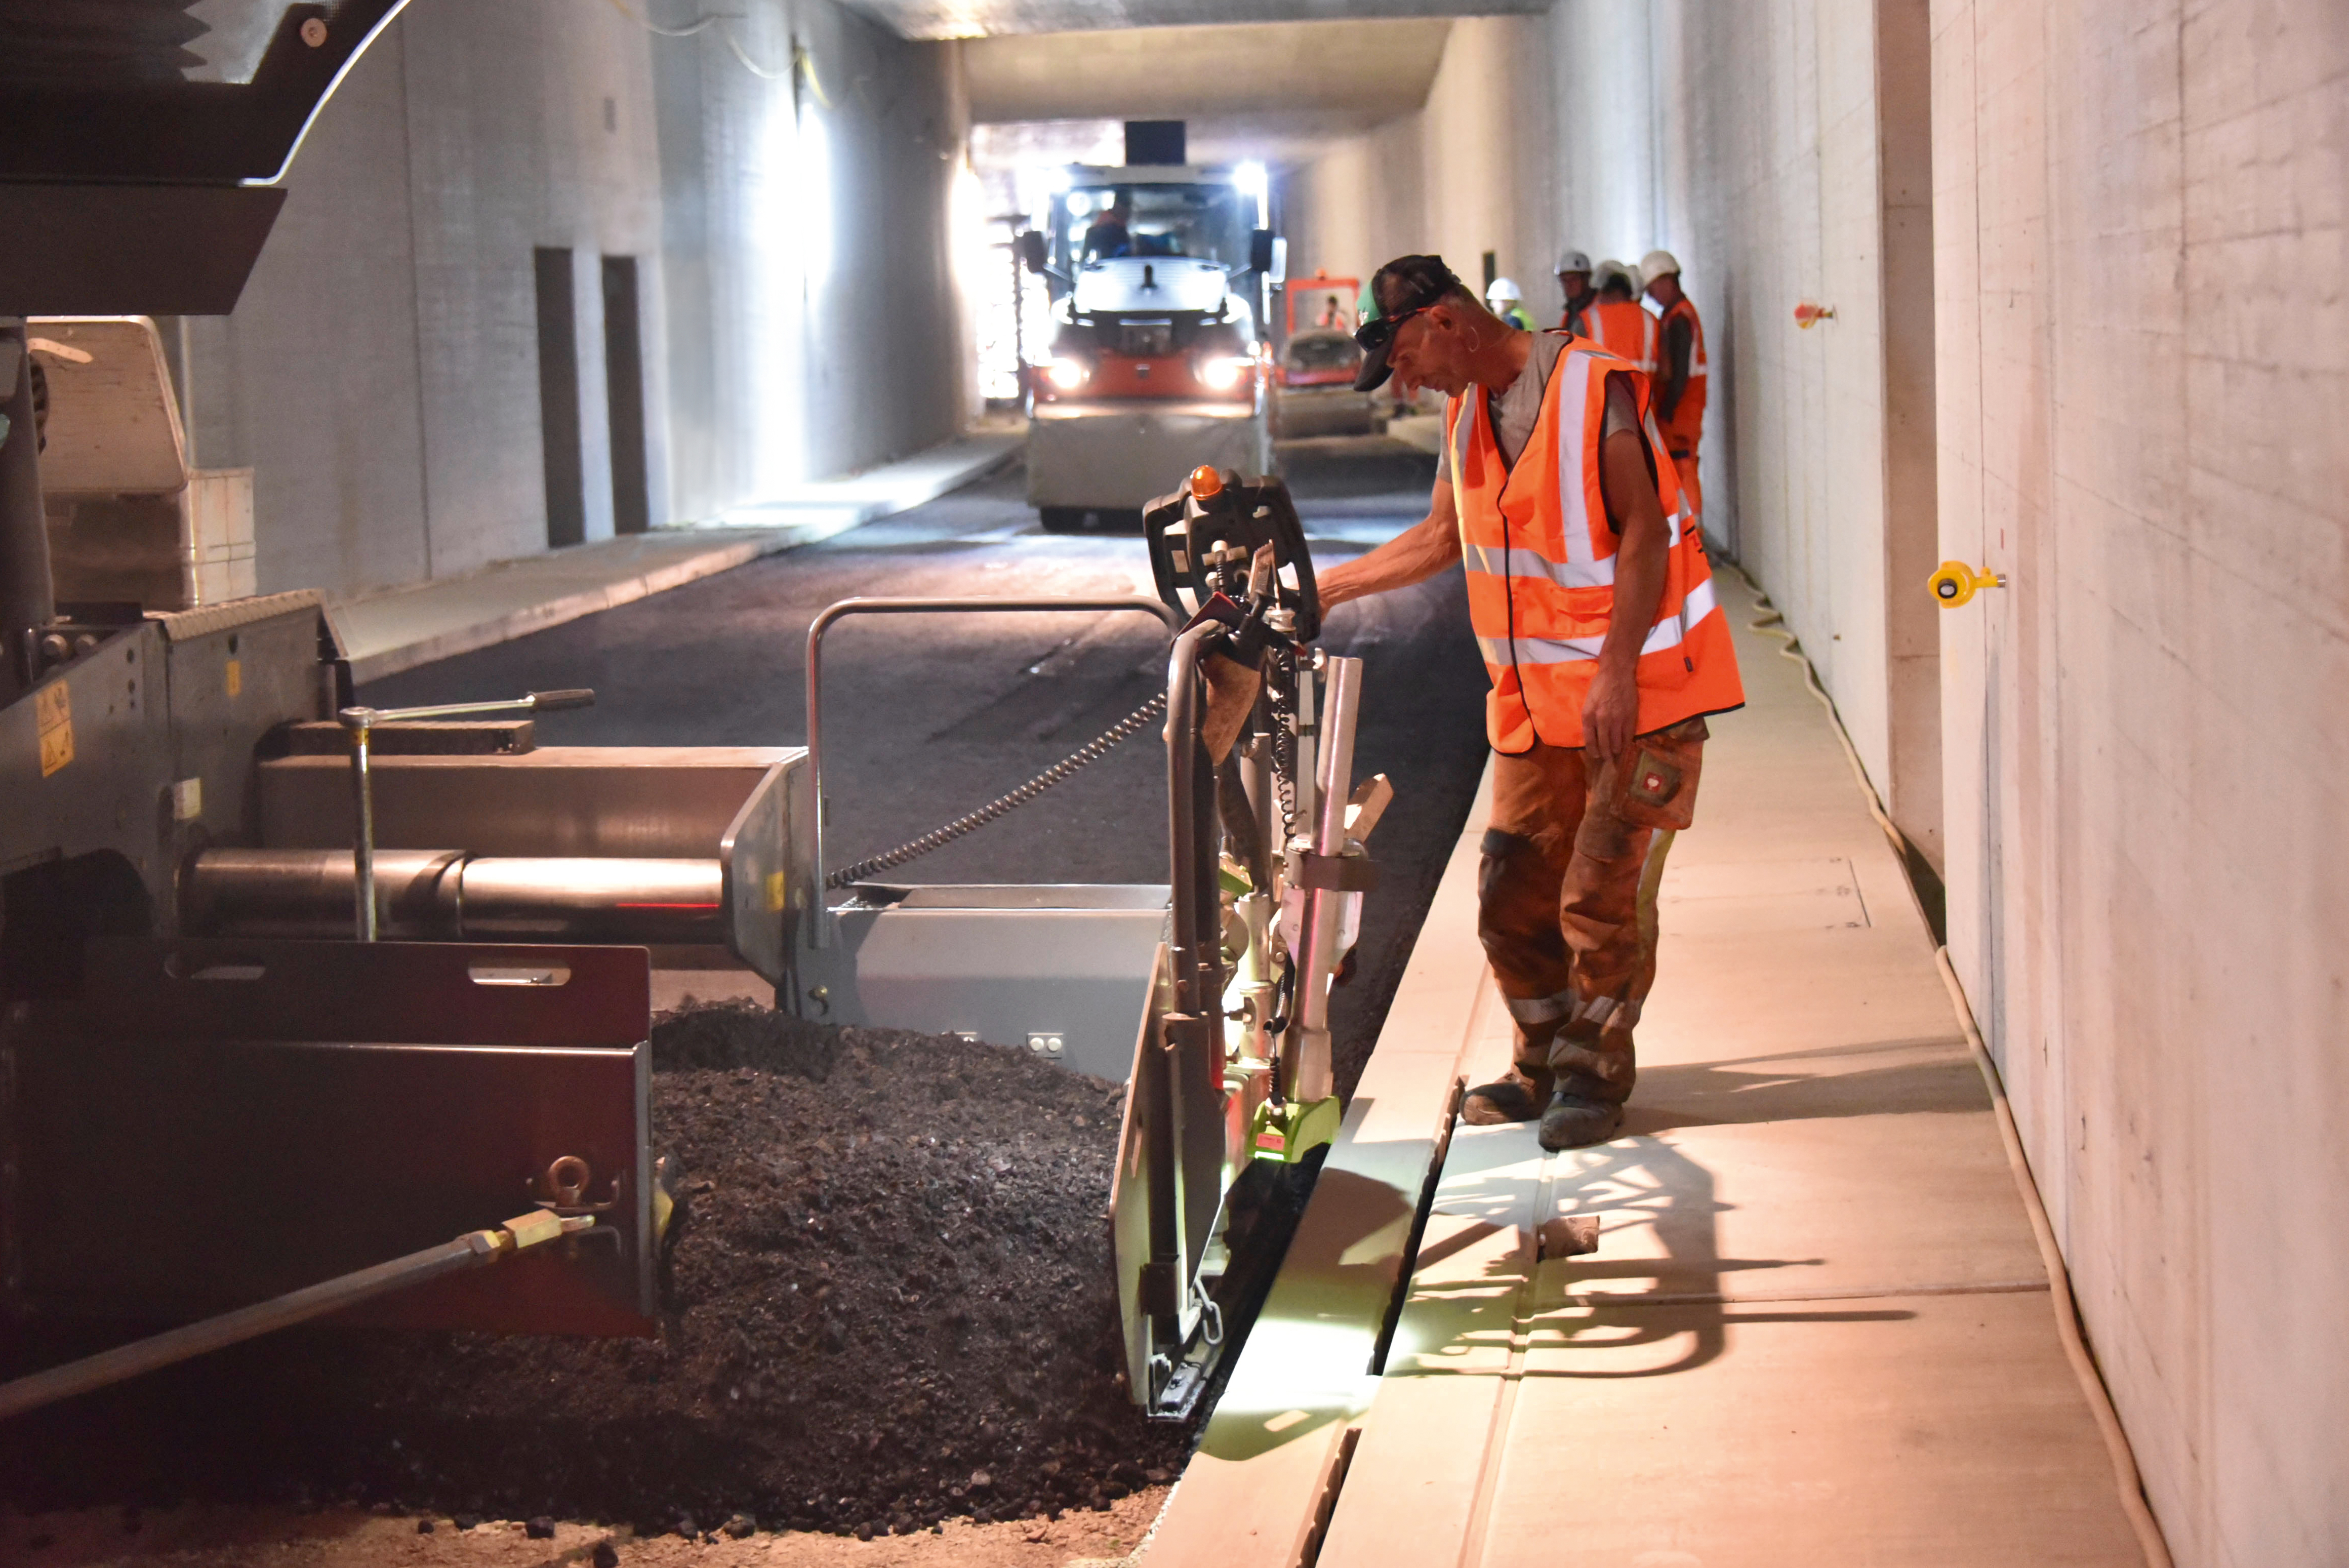 The challenge of low-temperature asphalt: the contractor used Vögele and Hamm machines to build a high-quality, homogeneously compacted carriageway in the Karlsruhe road tunnel.